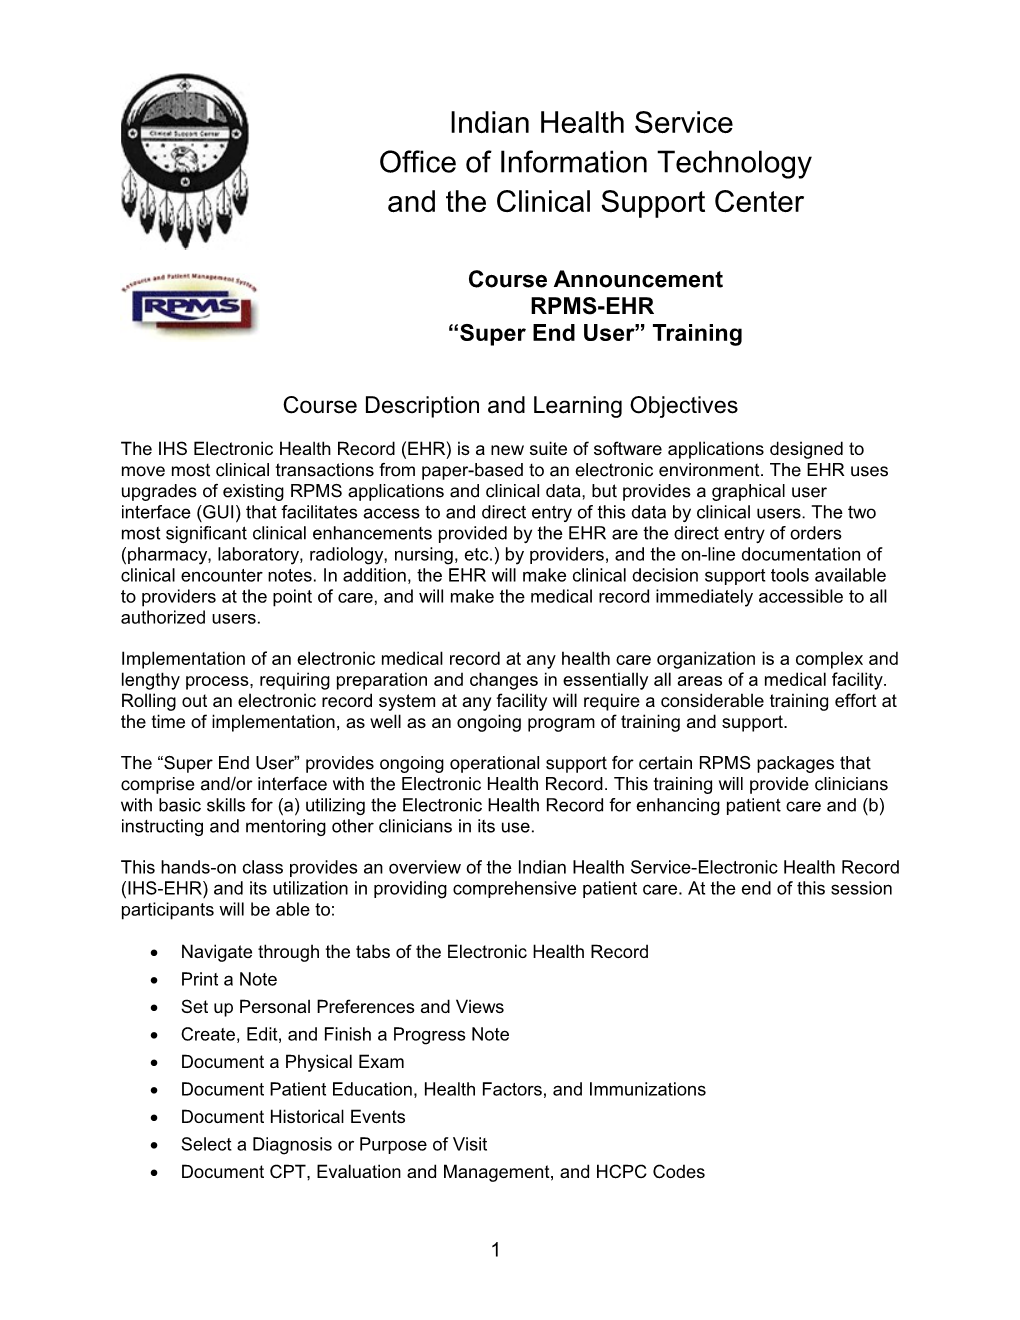 RPMS-EHR Supper End User Training - Course Announcement